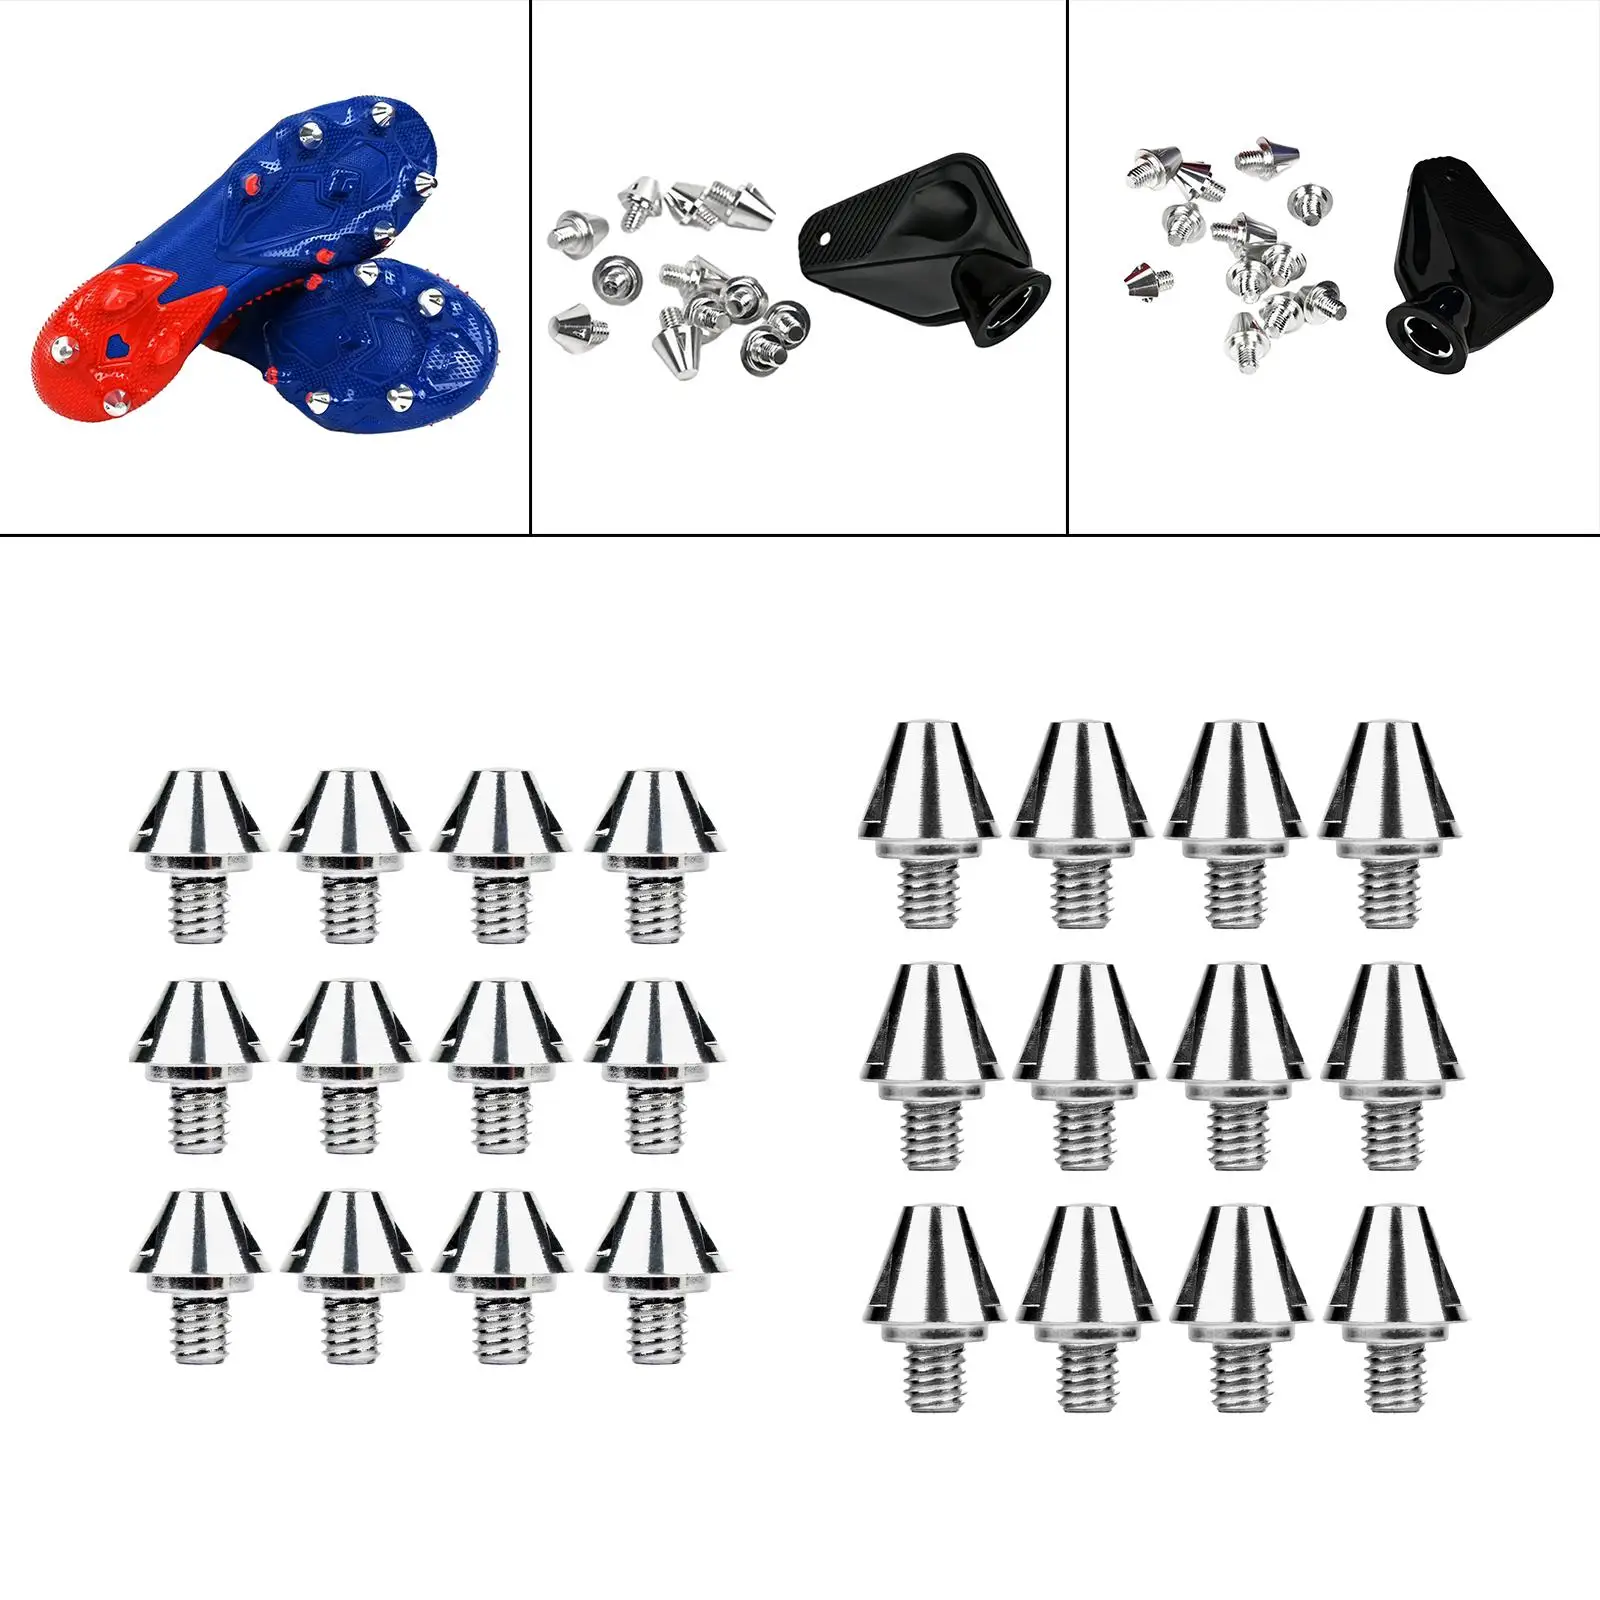 12Pcs Rugby Shoes Studs Soft Ground Turf Professional M6 Soccer Boot Cleats for Indoor Outdoor Sports Athletic Sneakers Training